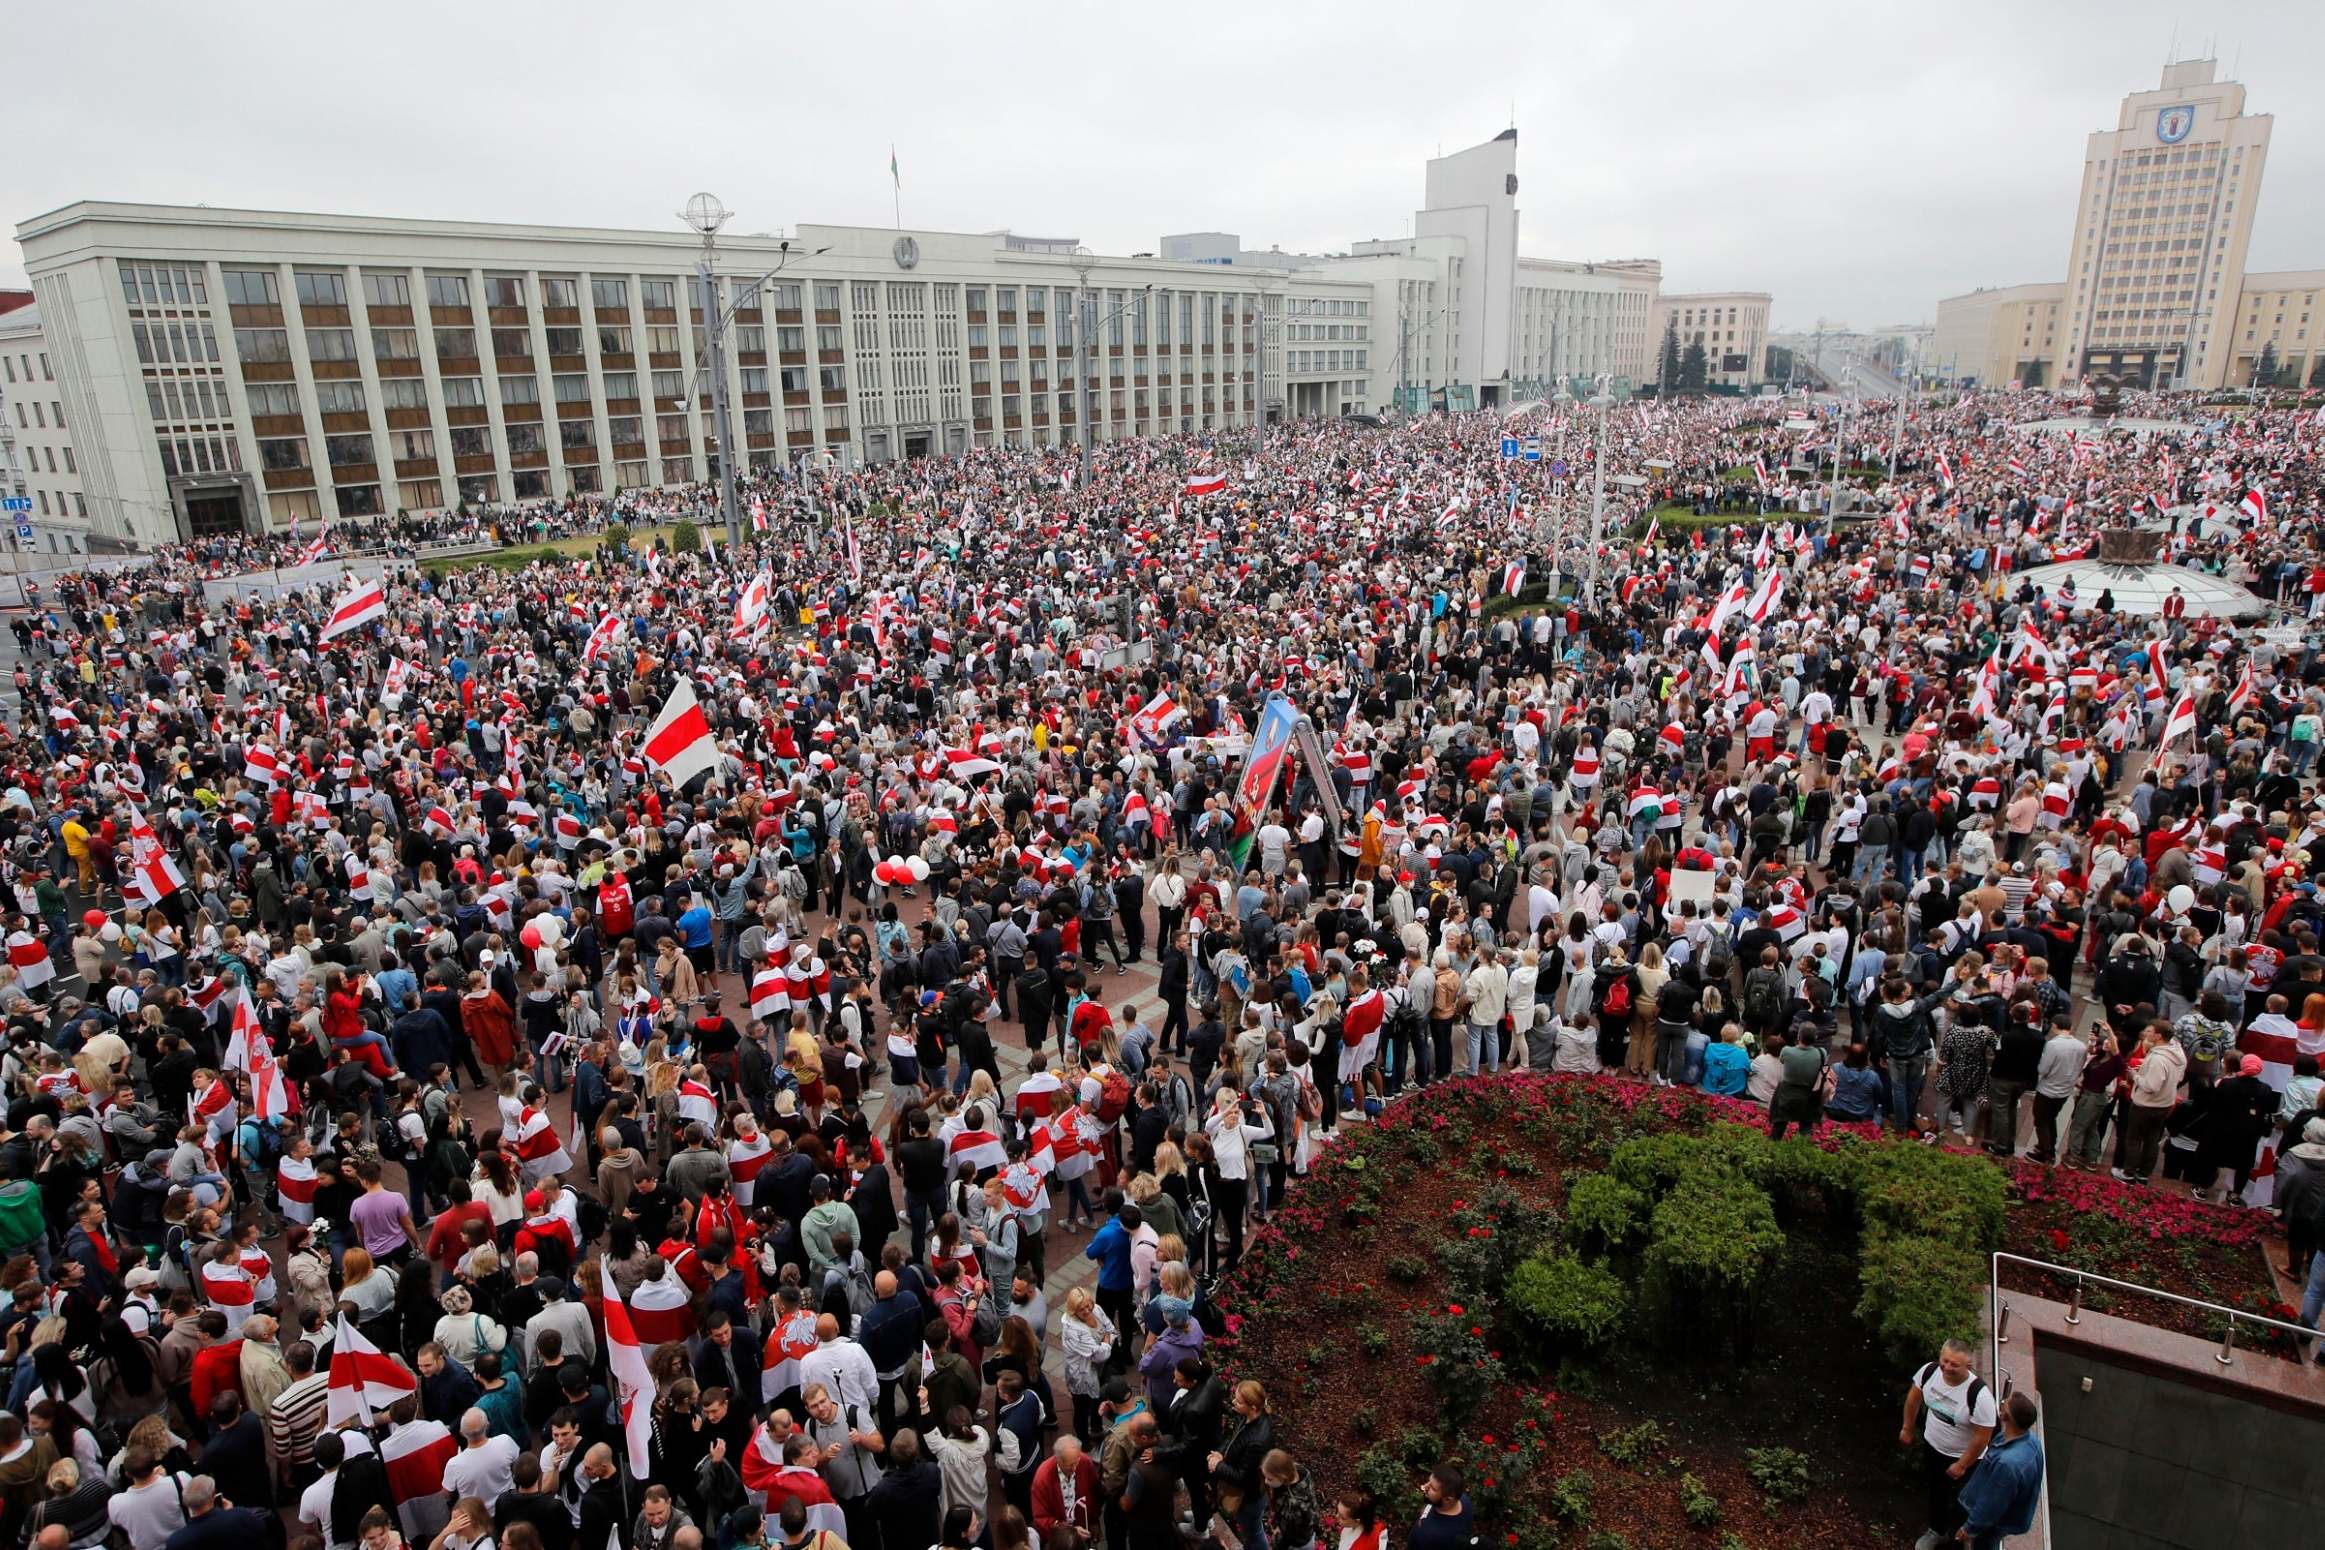 People attend an opposition demonstration to protest in Minsk on Sunday